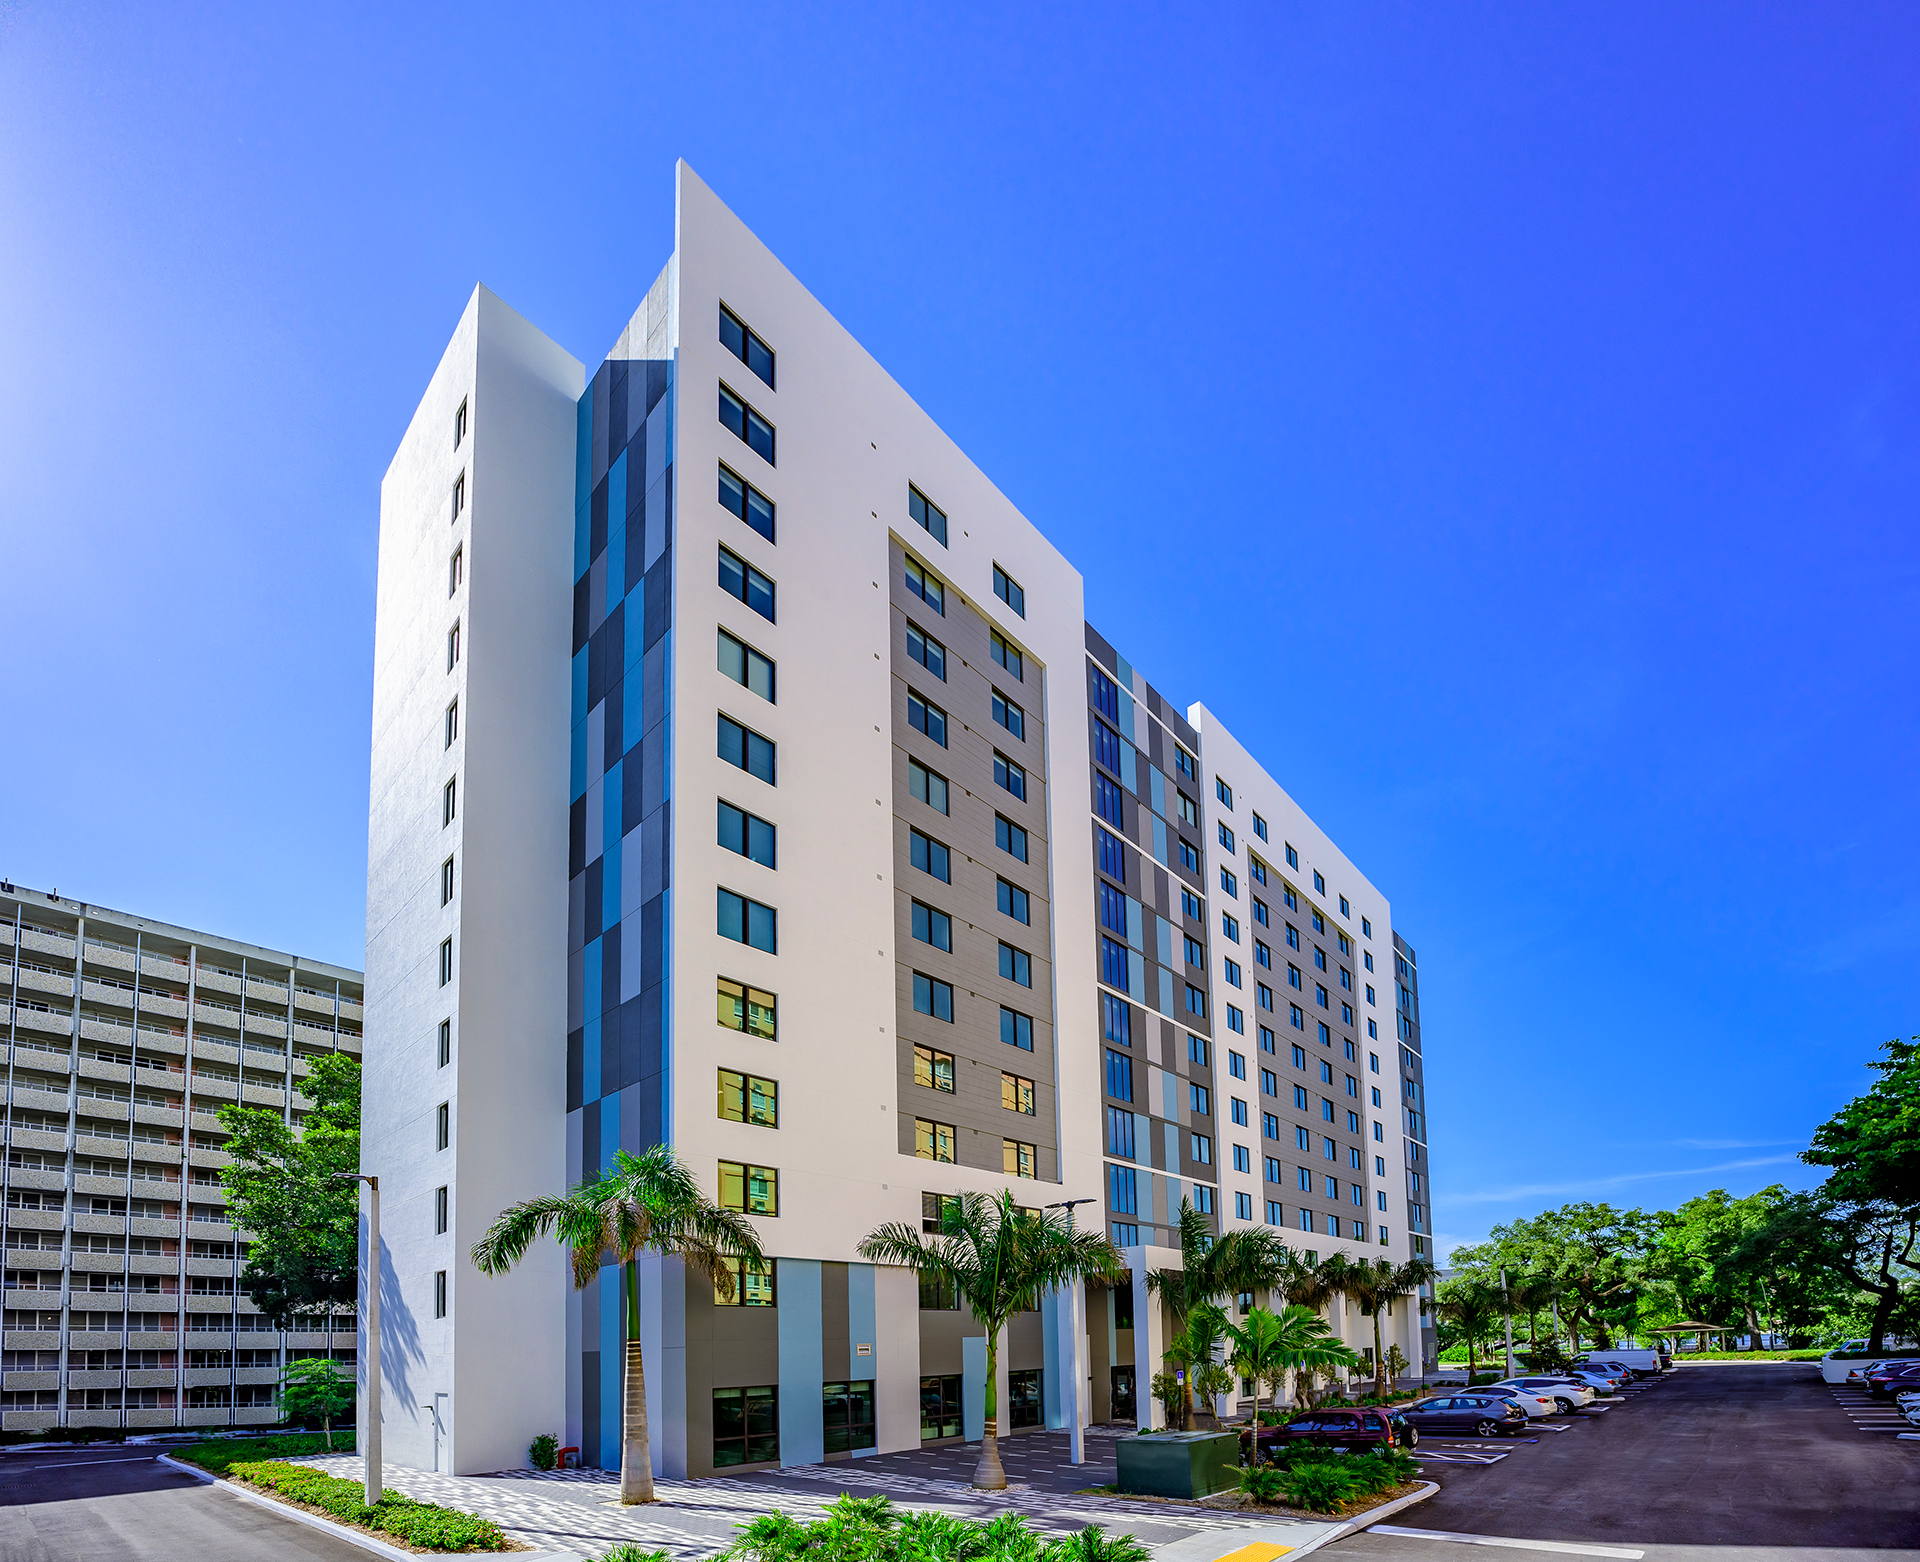 Brisas del Este, Miami-Dade's second "Faircloth-to-RAD" project, contains an additional 30 Faircloth units serving ELI households.